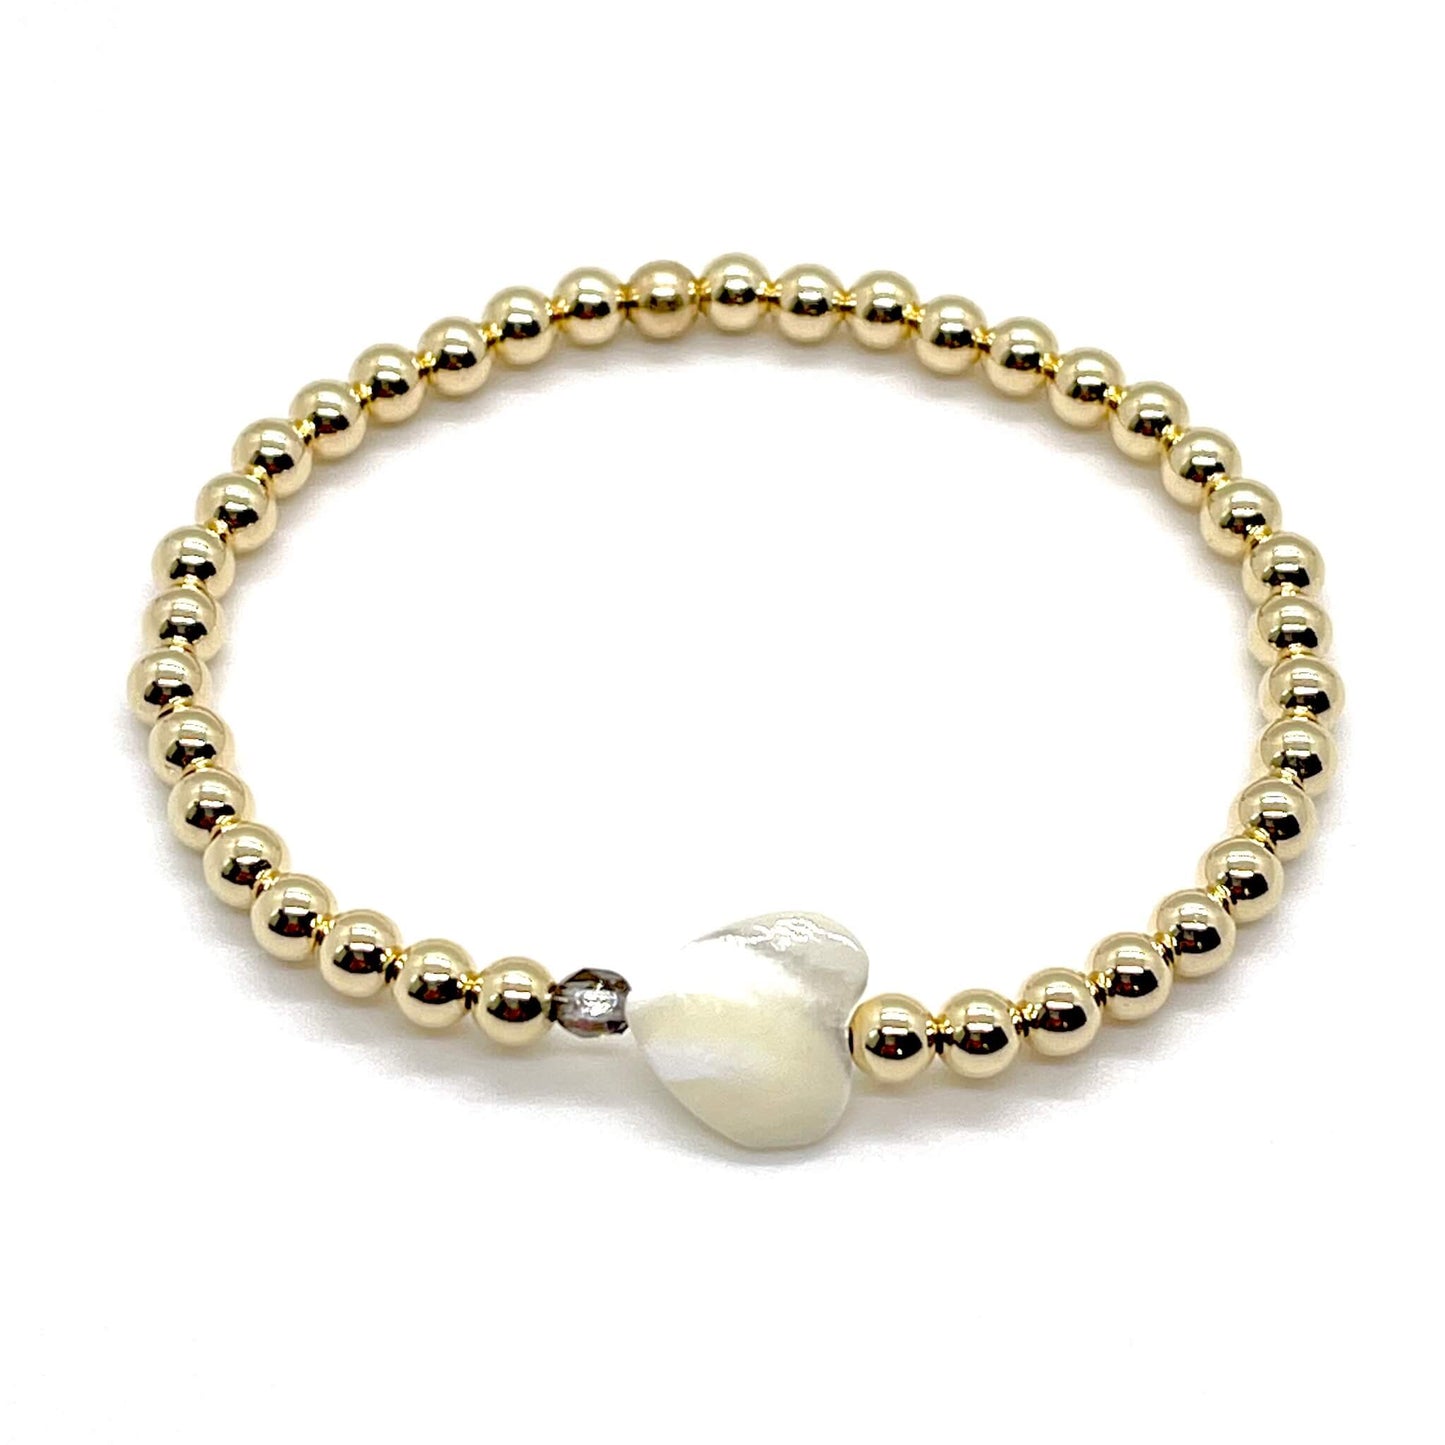 Gold heart bracelet with a mother-of-pearl heart, a small faceted grey-silver crystal, and 4mm 14K gold filled beads.